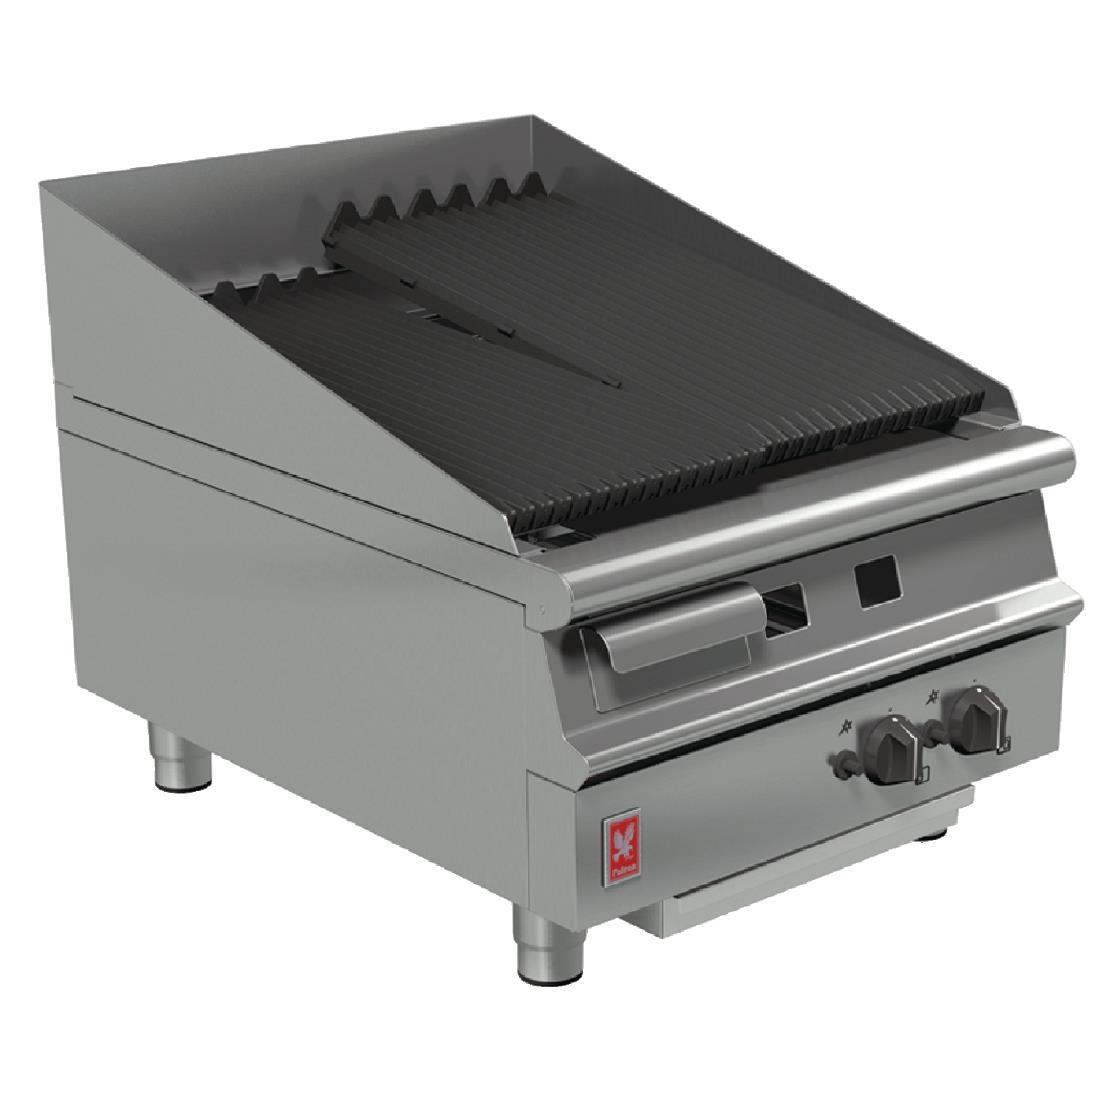 Falcon Dominator Plus Natural Gas Chargrill Brewery G3625 - DK945-N  - 1